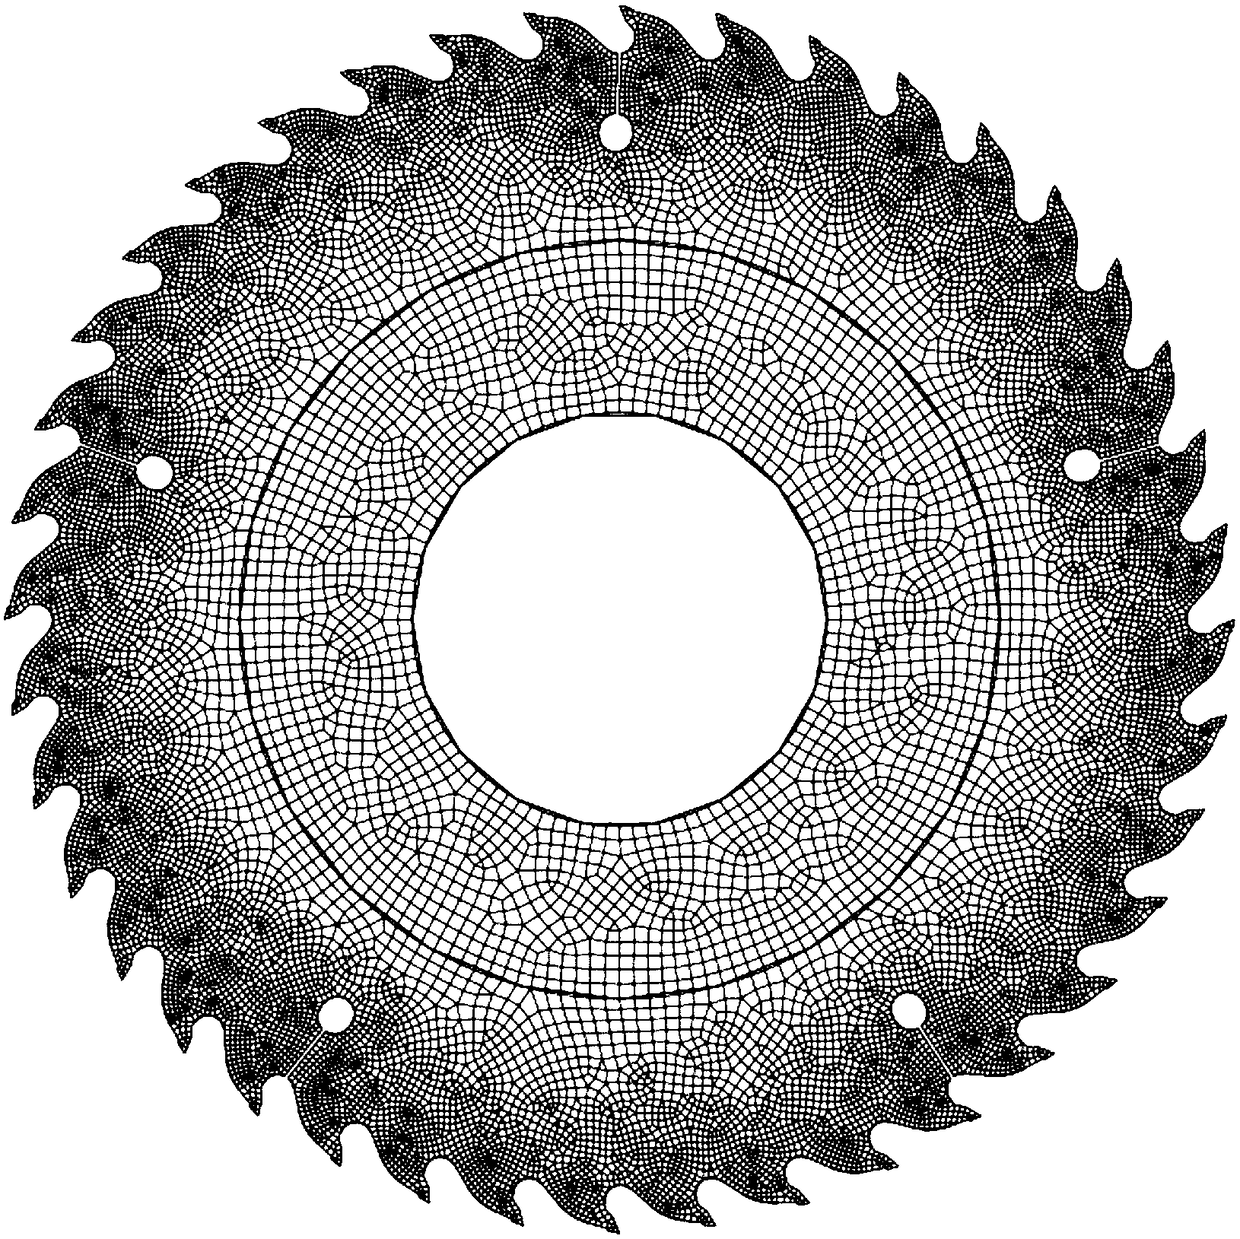 A method for predicting the critical temperature load on the outer edge of a woodworking circular saw blade